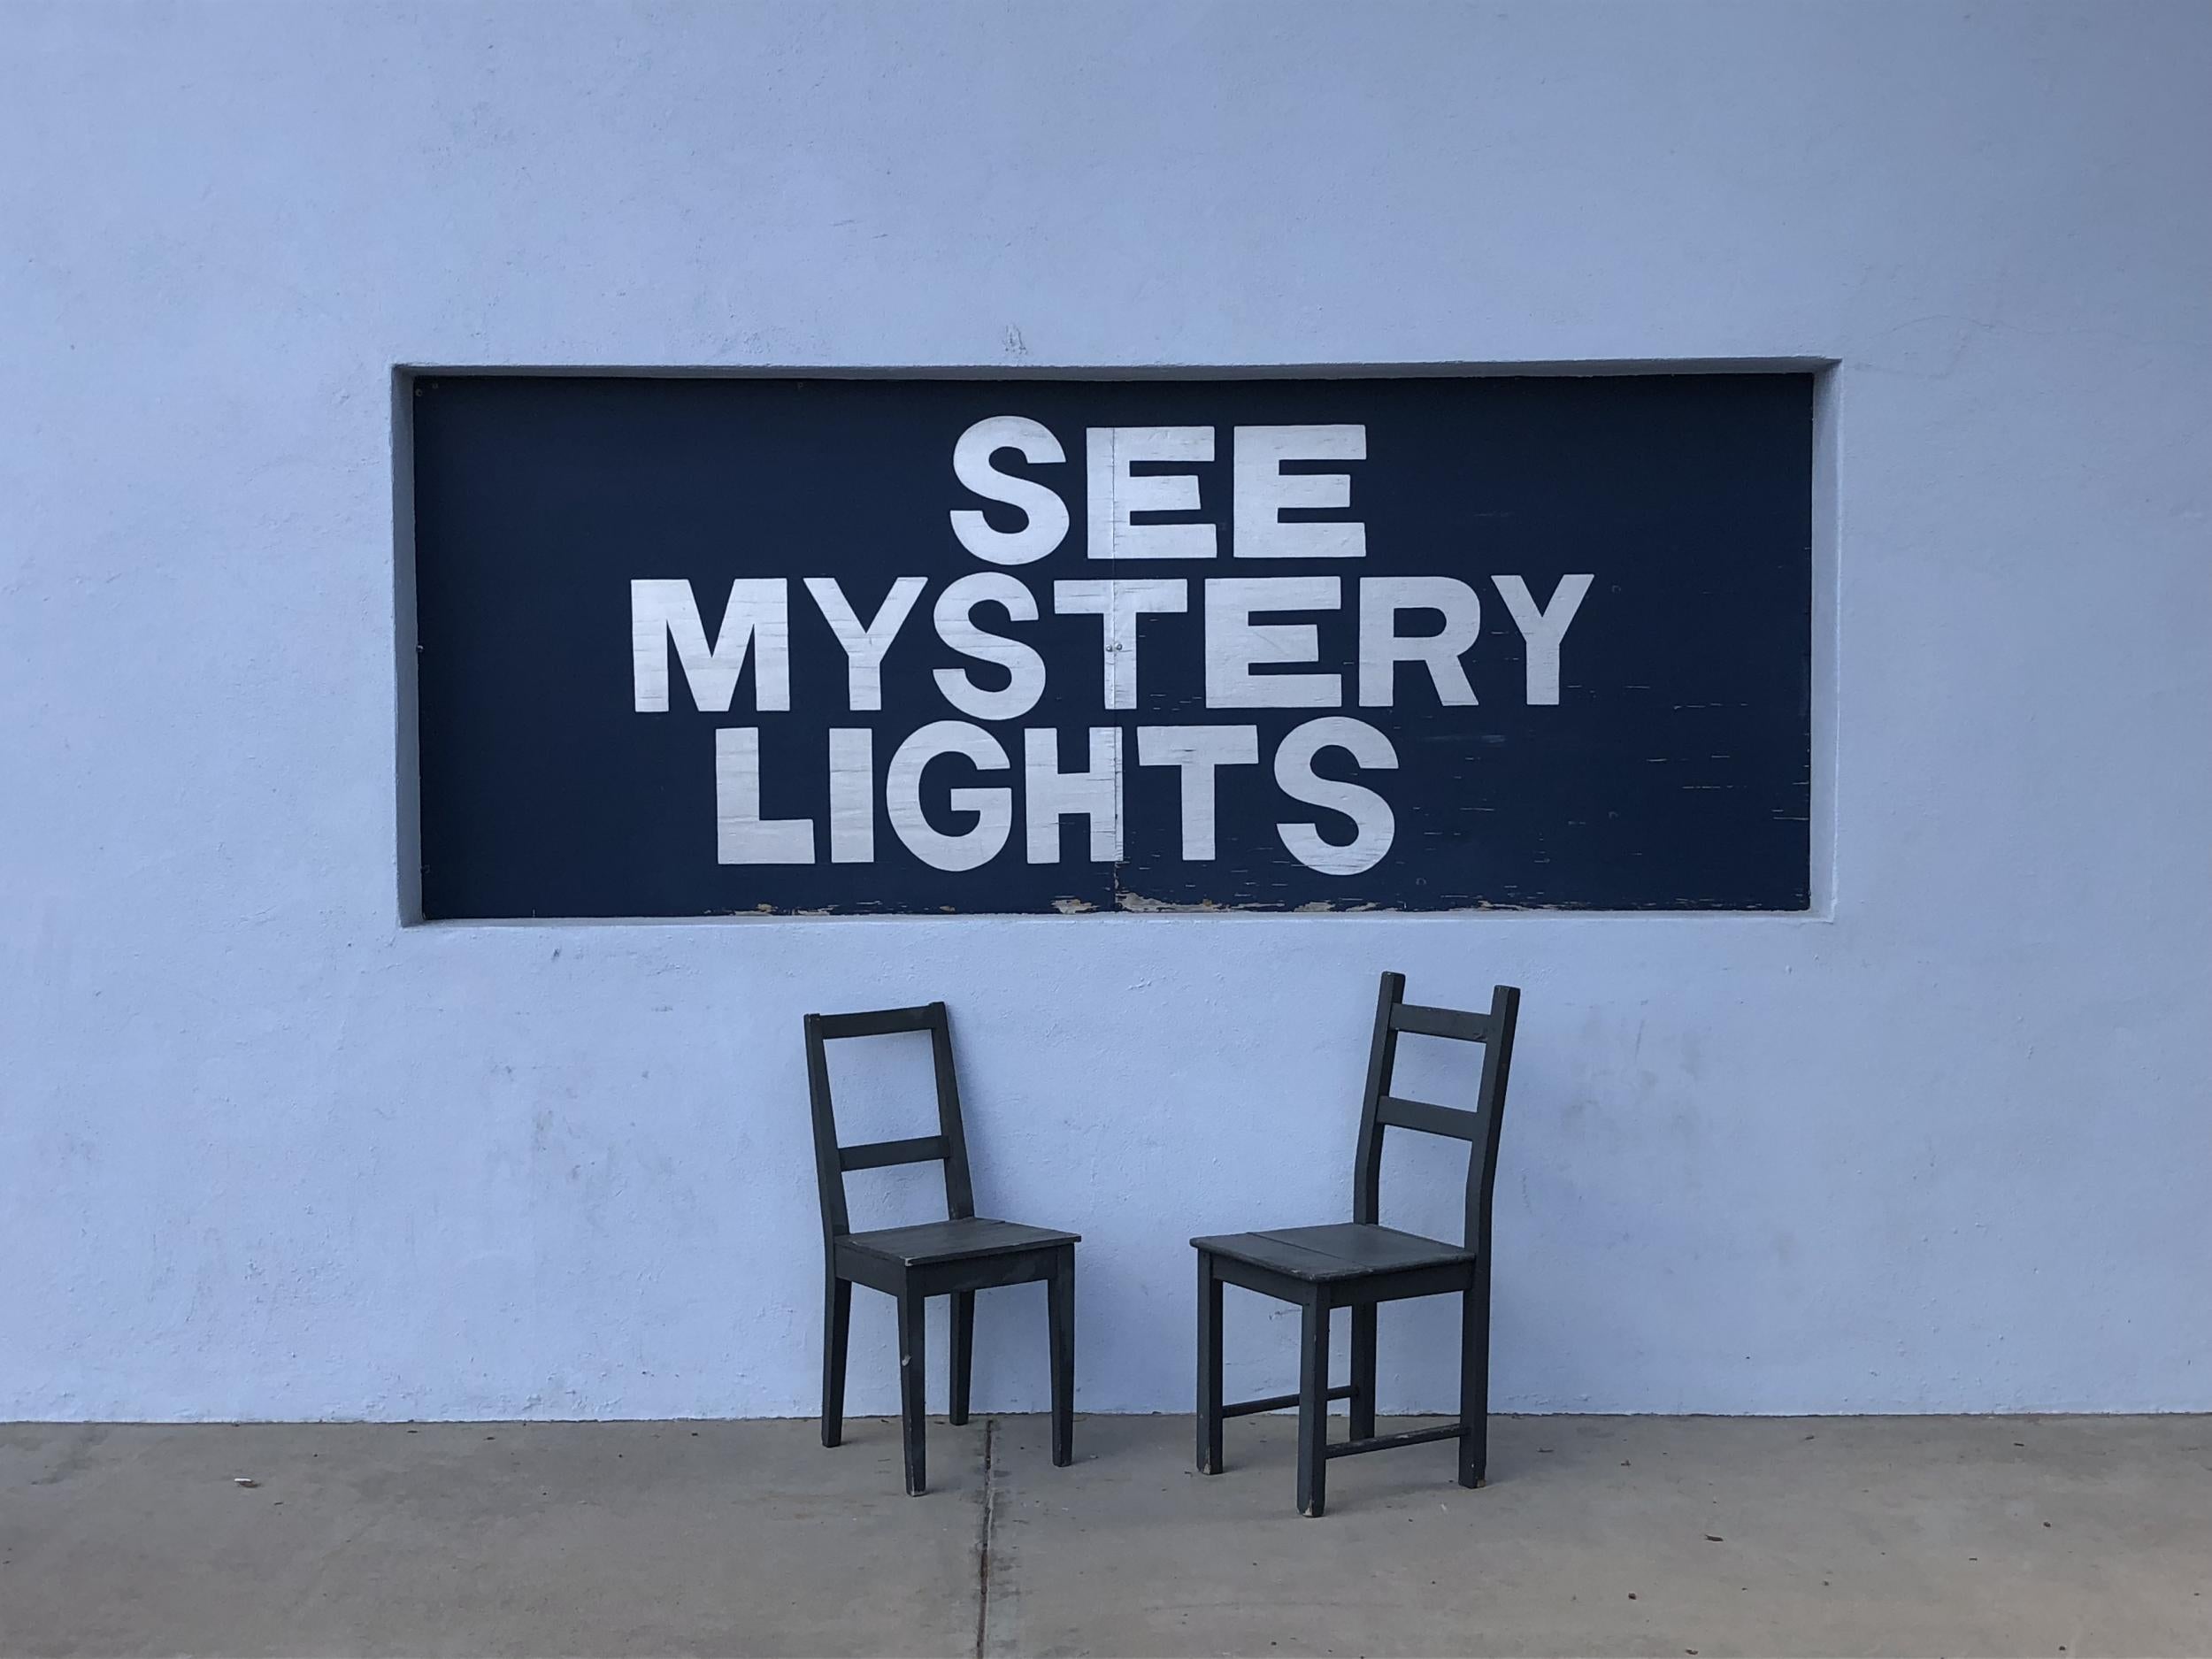 Watch out for Marfa's mystery lights